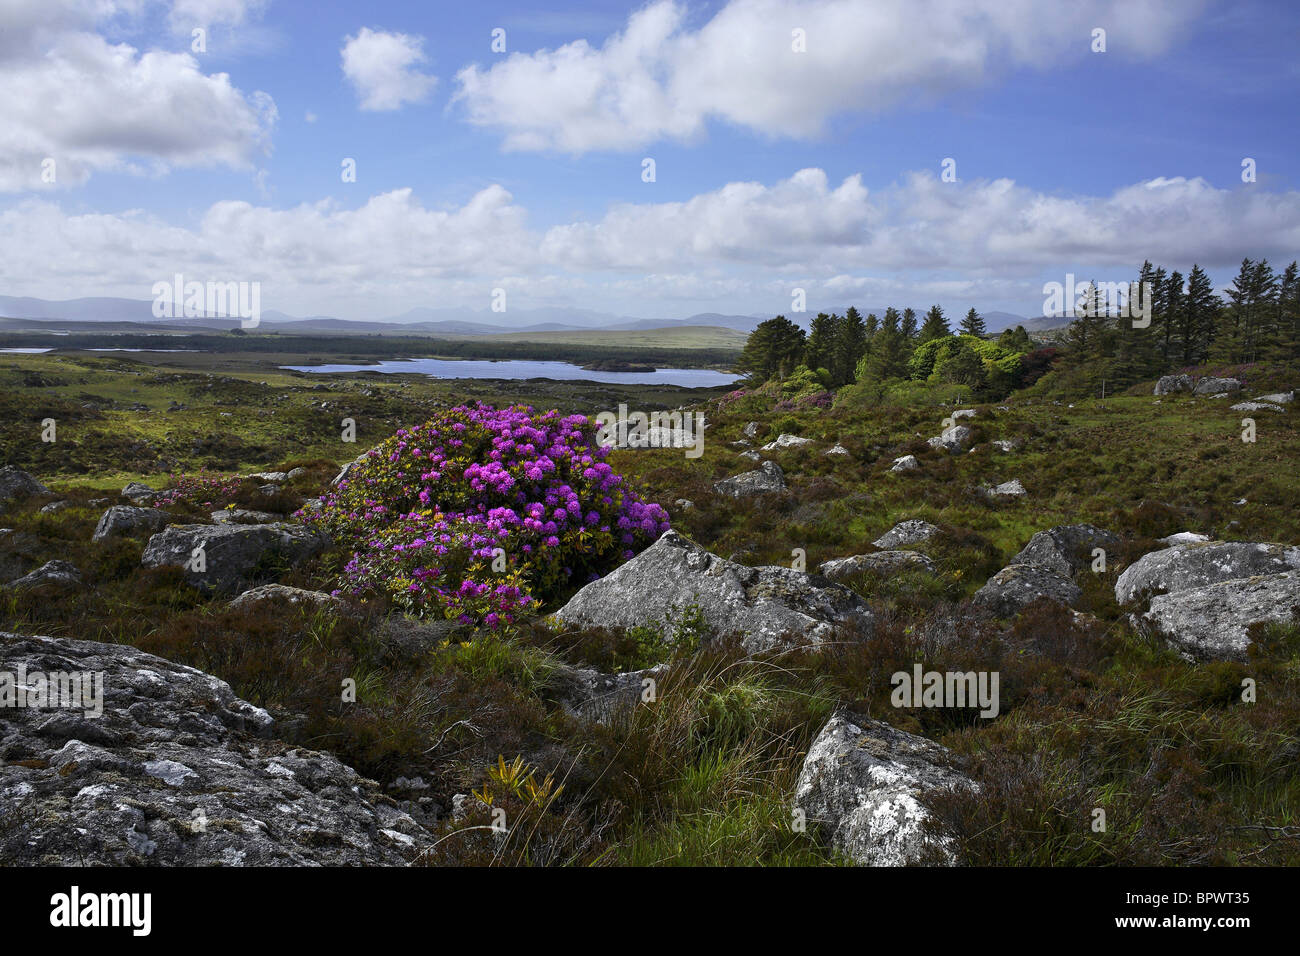 Rhododendron Flowers ( Rhododendron ponticum ) and Landscape, Connemara County Galway Ireland Stock Photo